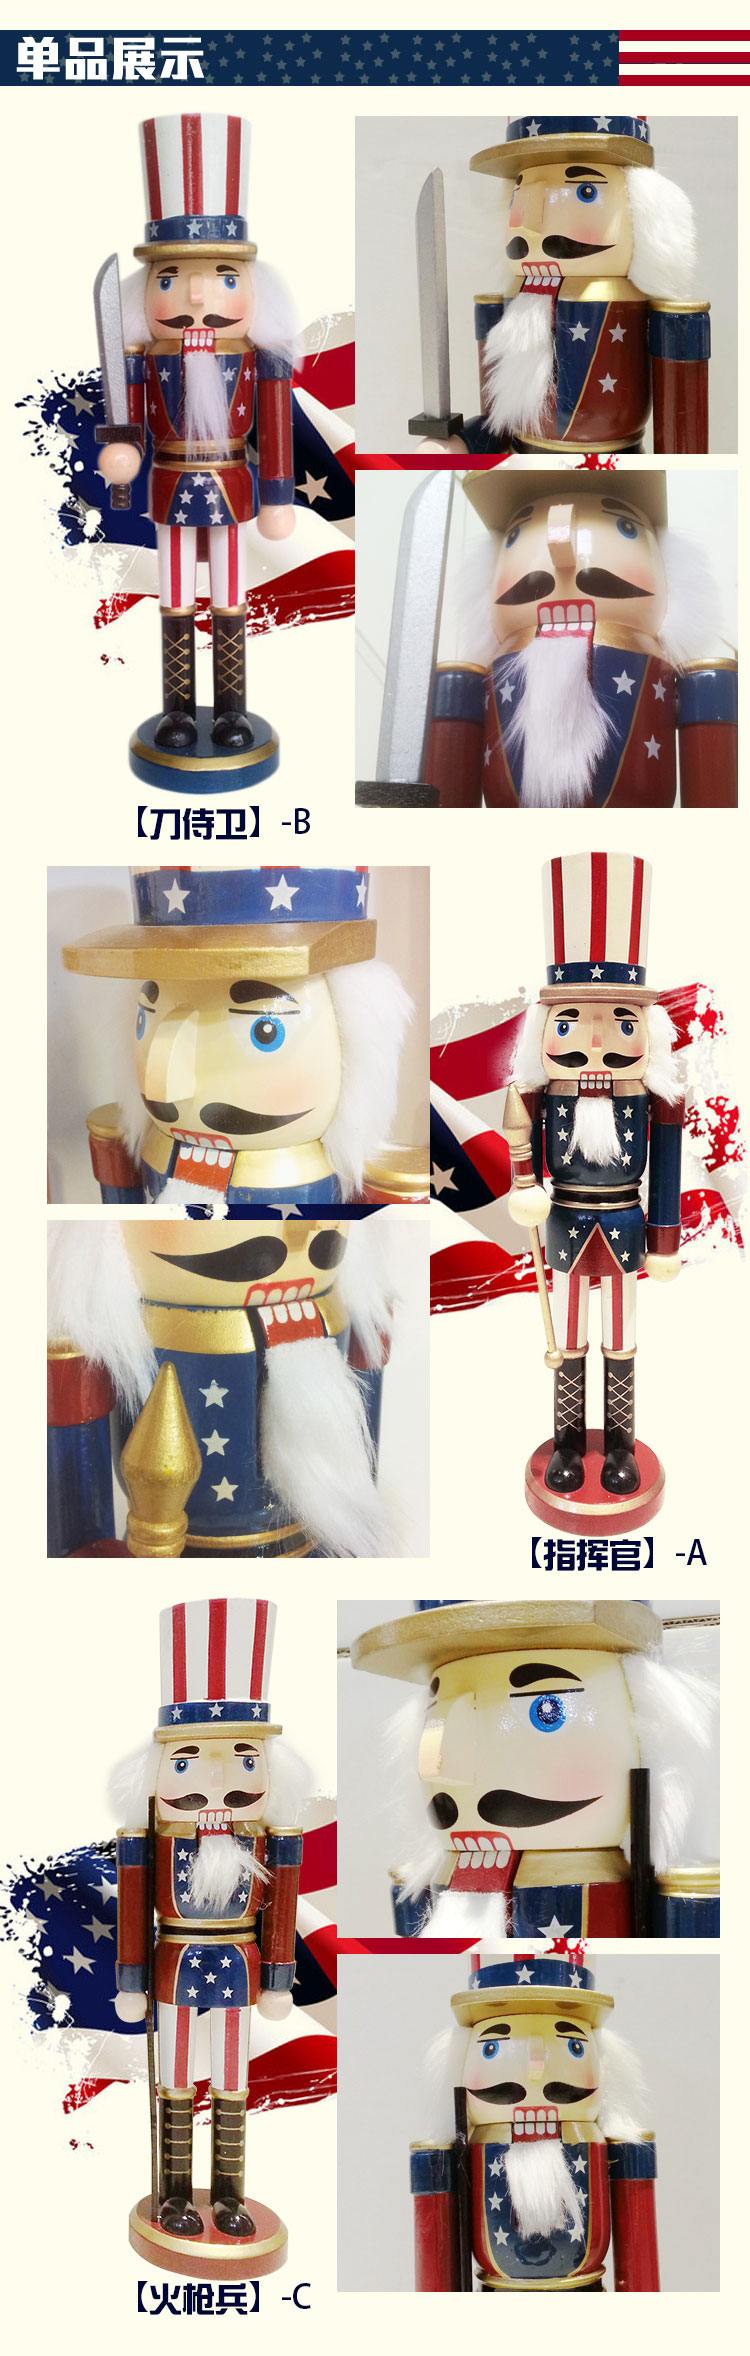 The Nutcracker puppet soldiers ornaments 15 inch Home Furnishing decorative gift gift wedding decoration 211U15-A/B/C5